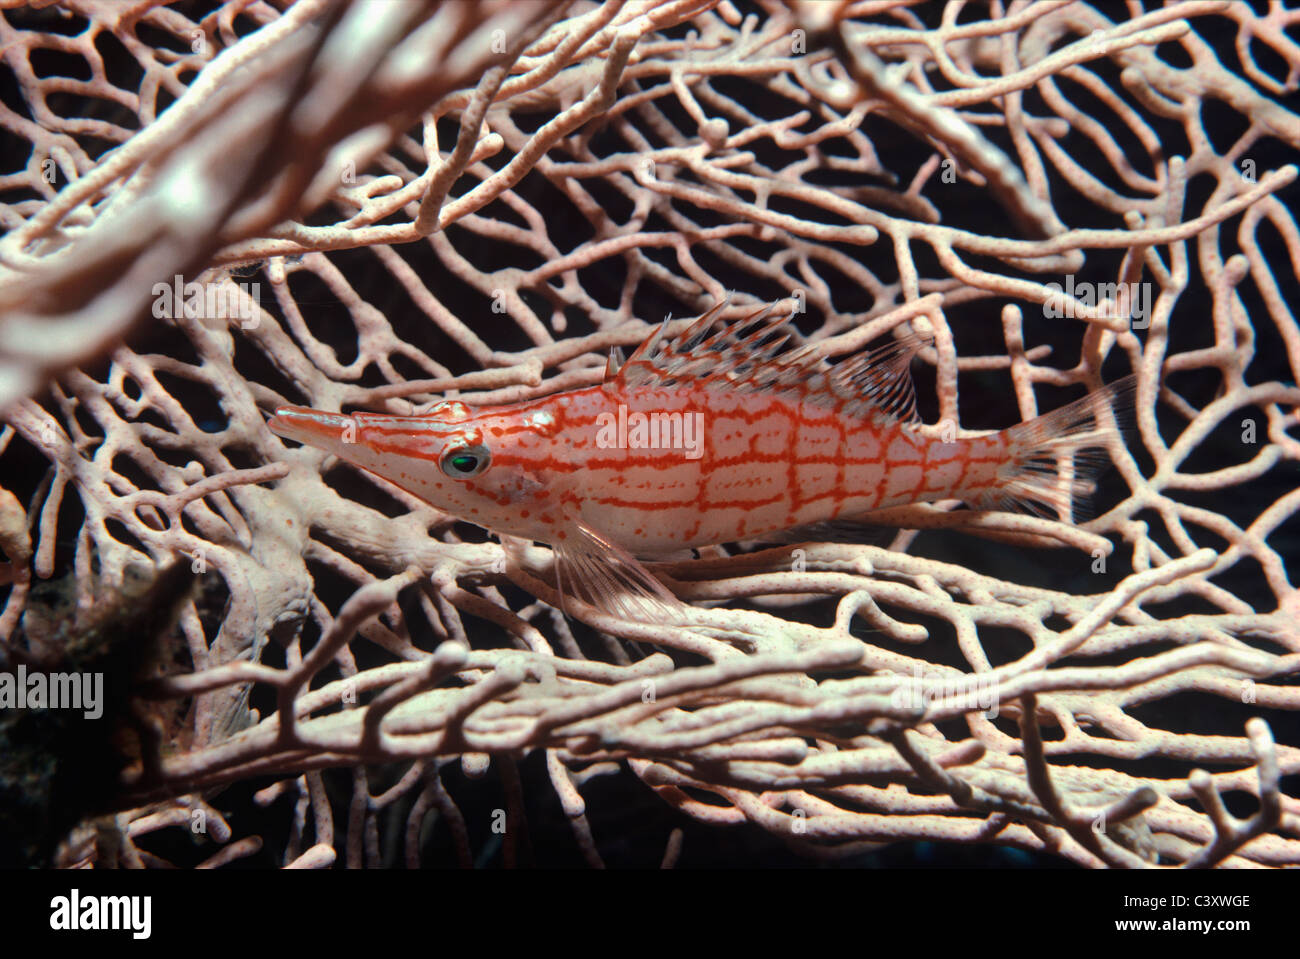 A Longnose Hawkfish (Oxycirrhitus typus) rets on Gorgonian Coral. Egypt, Red Sea Stock Photo